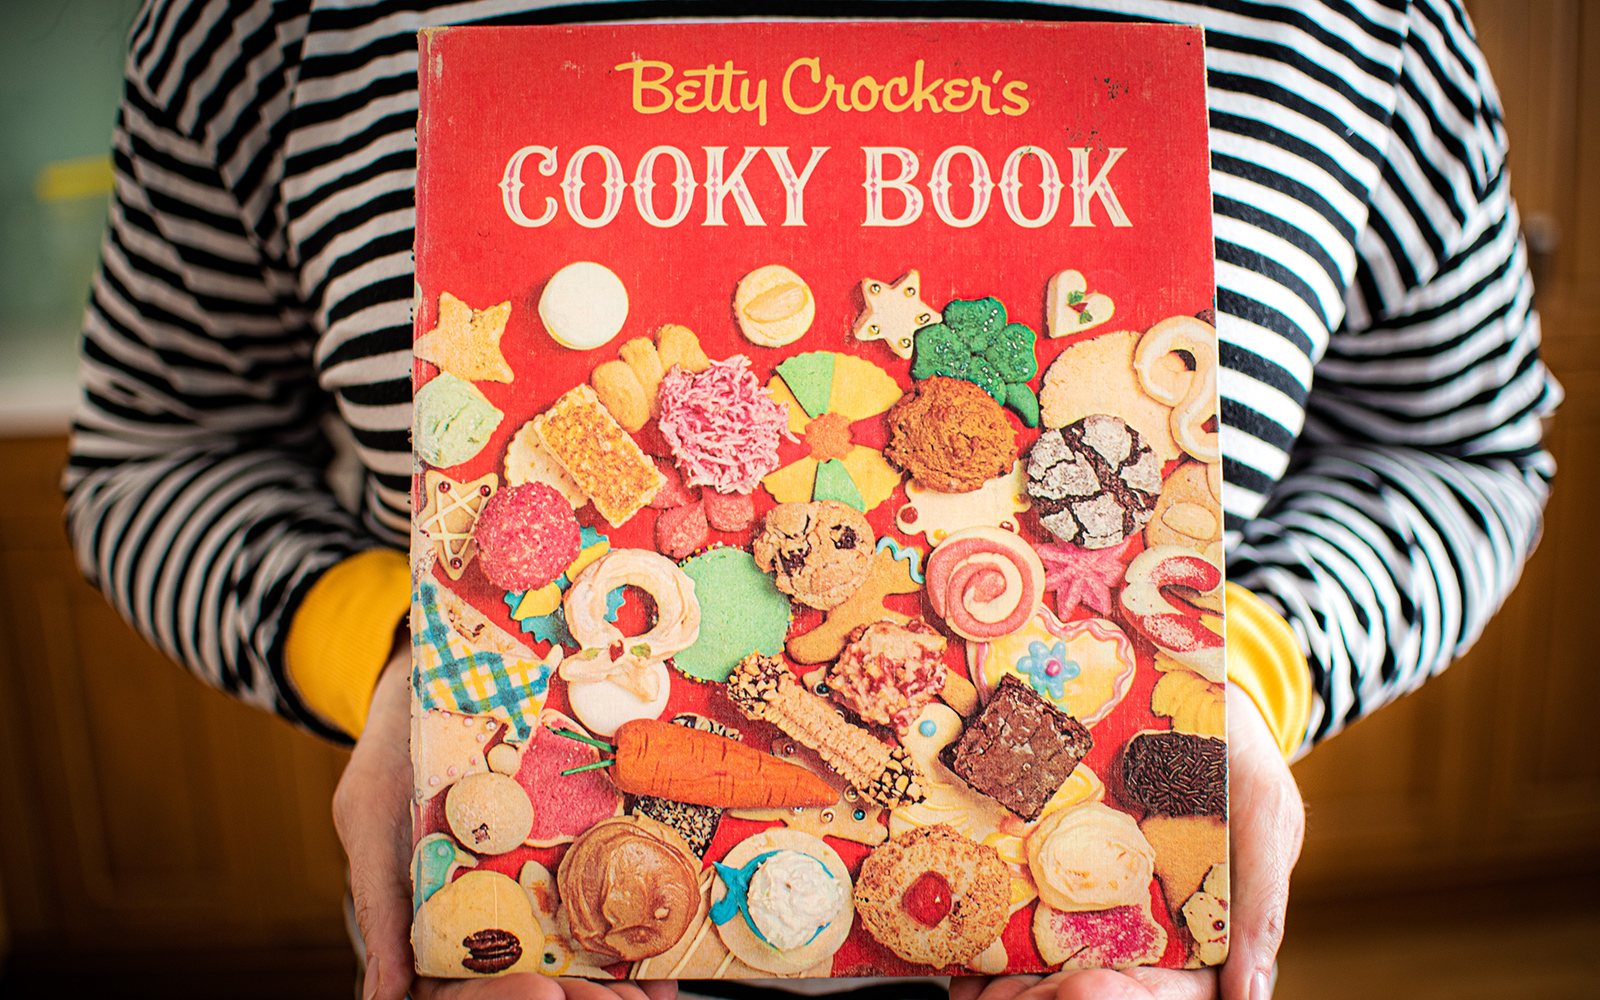  close-up of the cover of betty crocker's cooky book held by someone wearing a black and white striped shirt